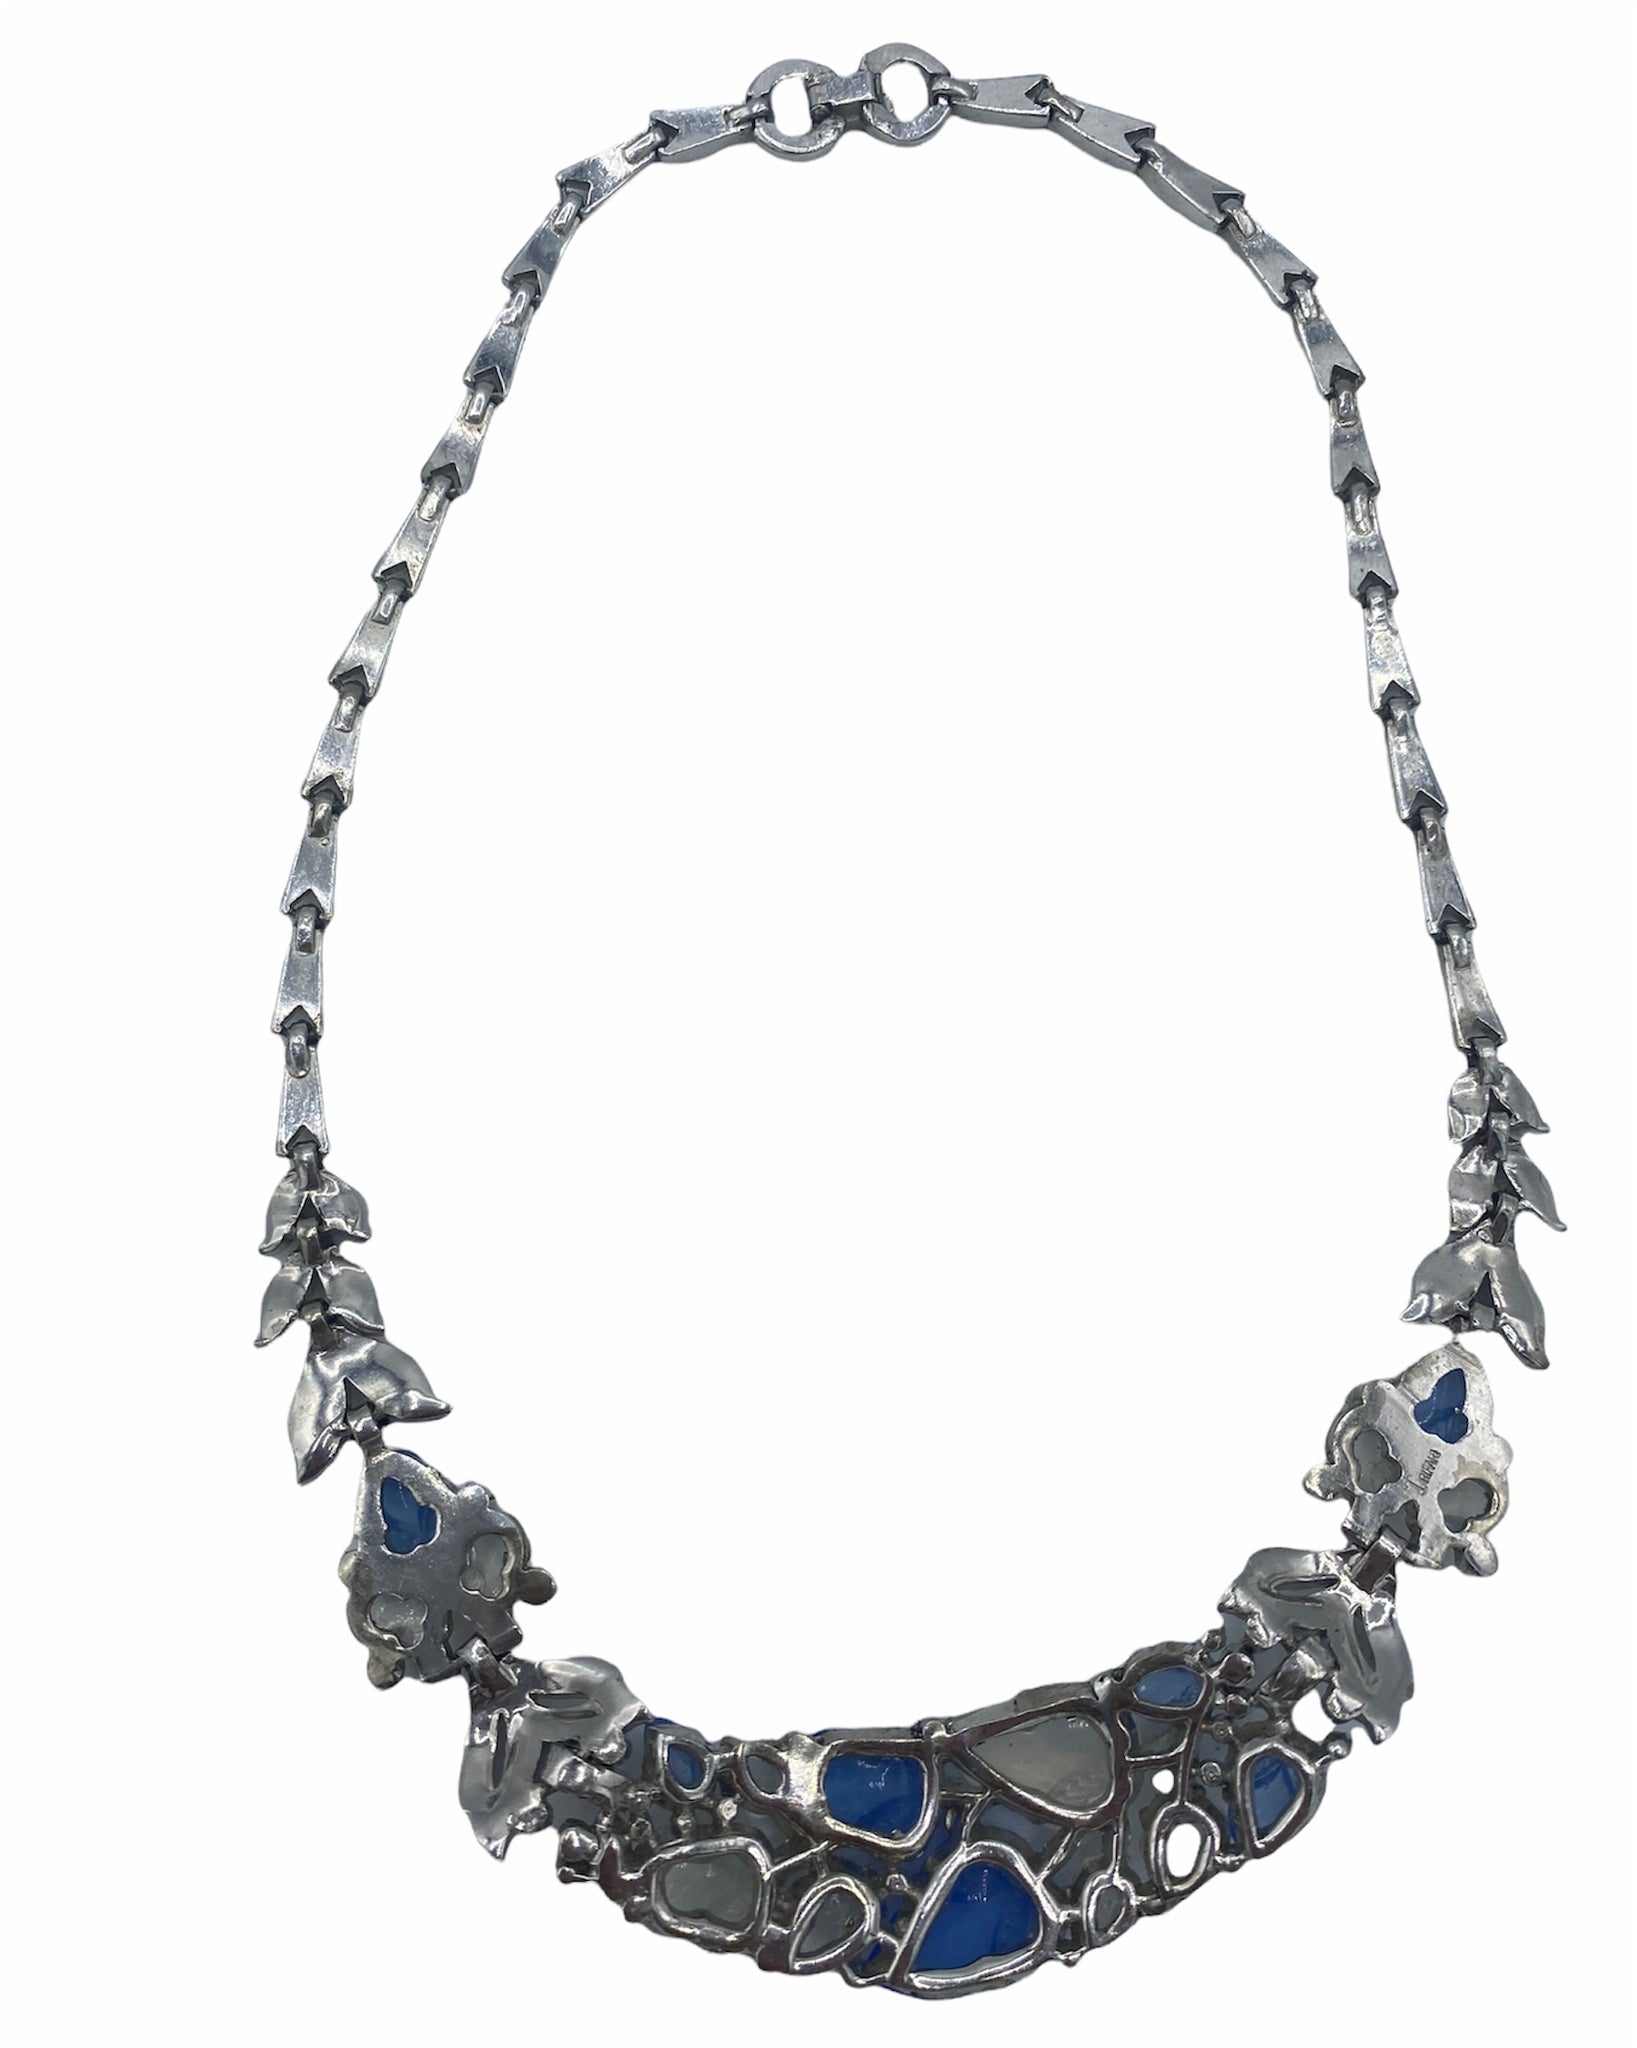 Trifari 30s Rhodium-Plated Tutti-Frutti Alfred Philippe Necklace with Blue and White Faux Stones, back